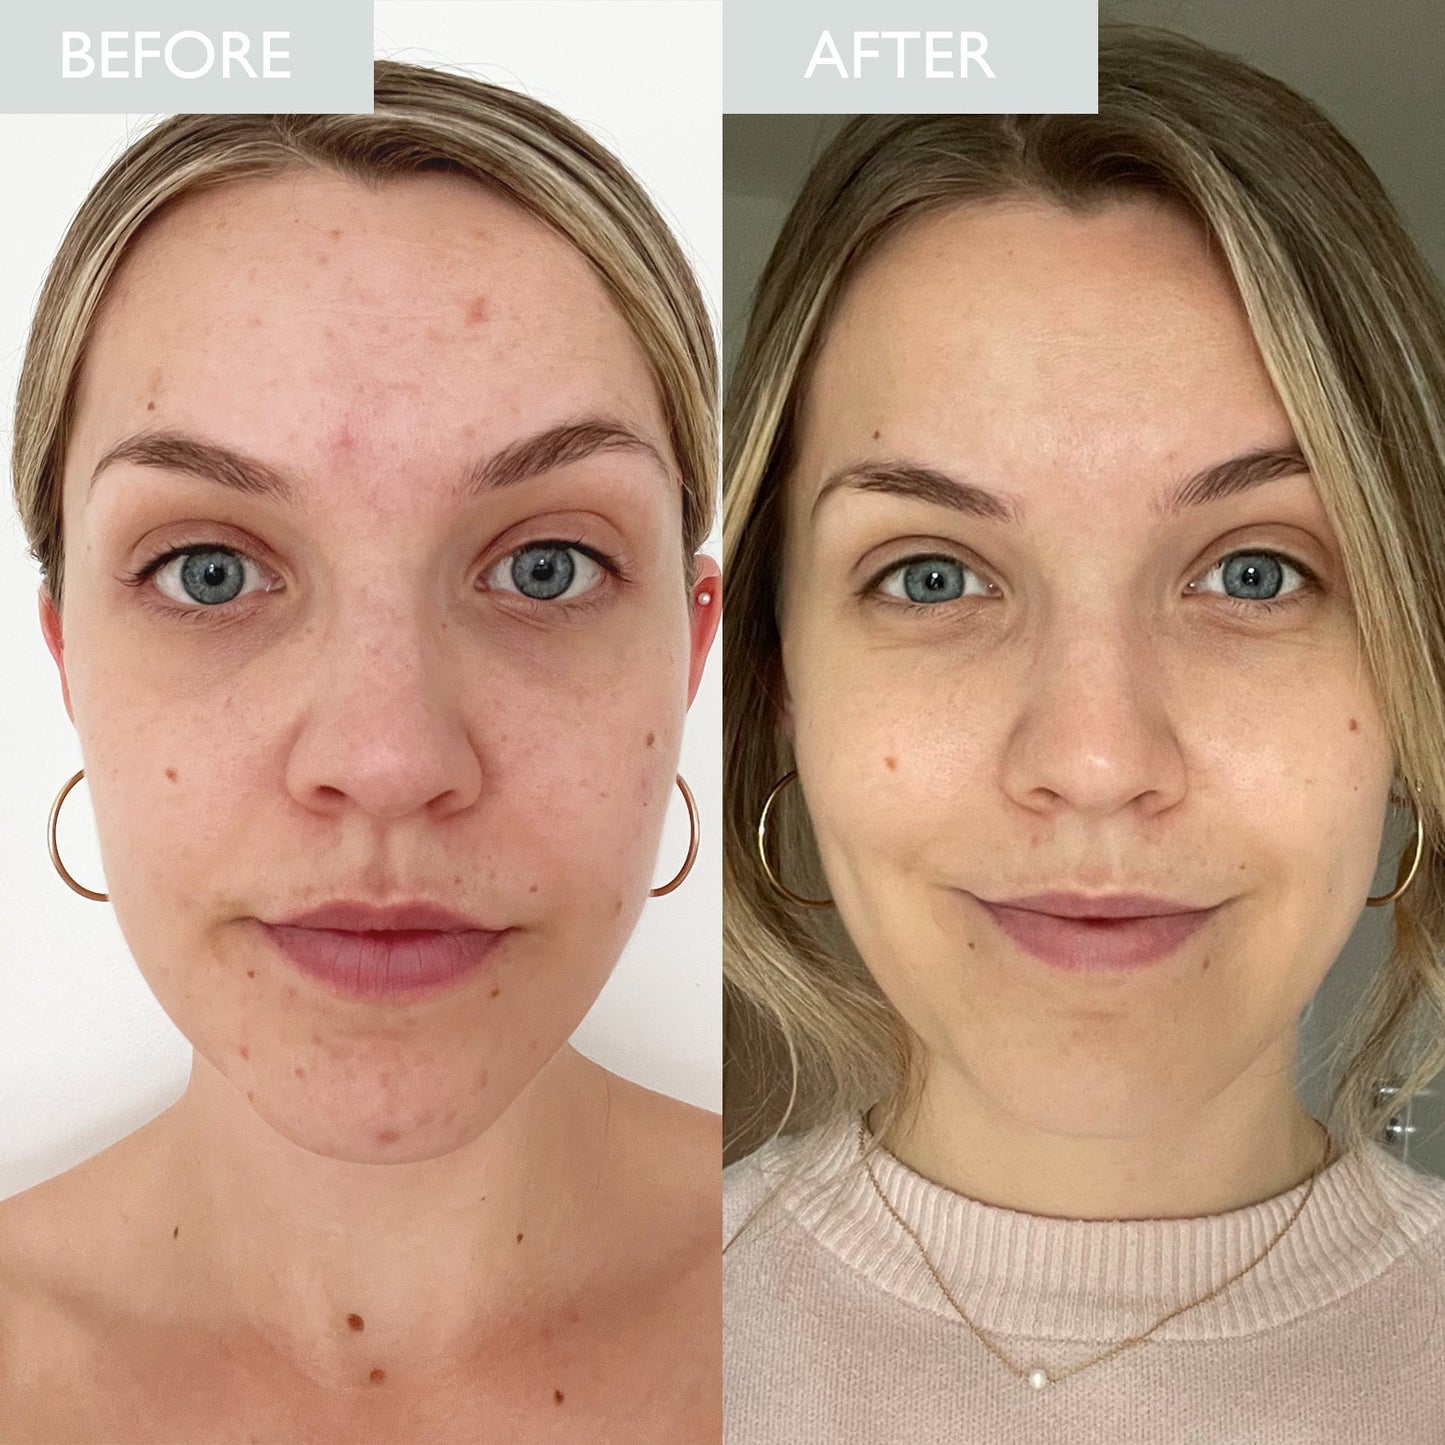 Image of a lady before and after using the combination skincare set.  Improved skin tone, texture and breakouts can be seen